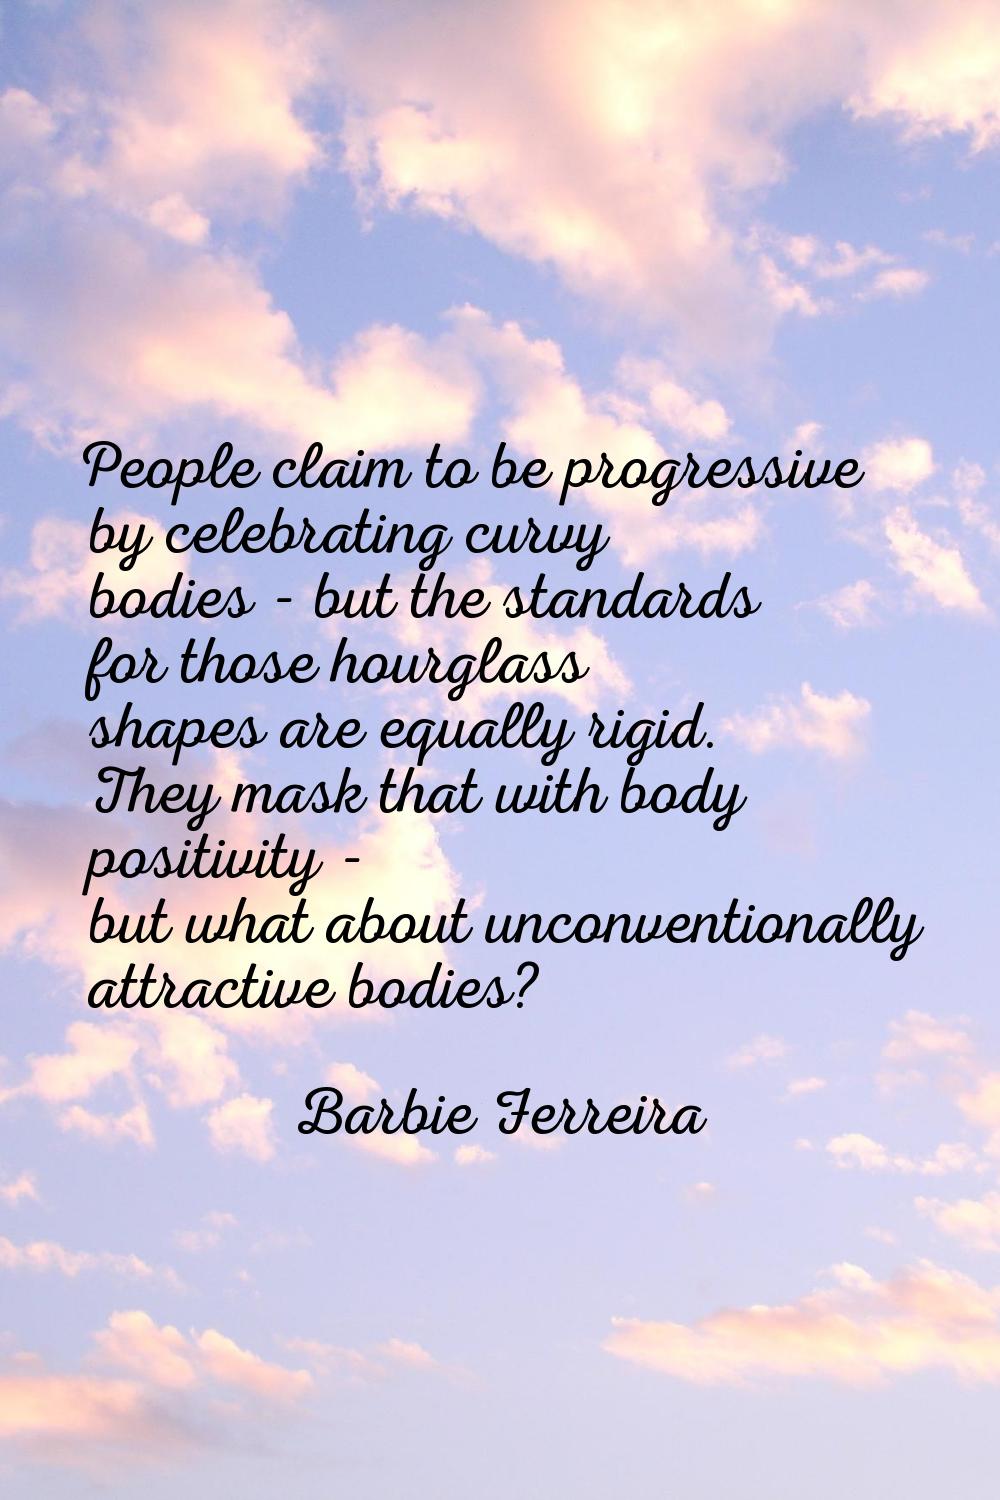 People claim to be progressive by celebrating curvy bodies - but the standards for those hourglass 